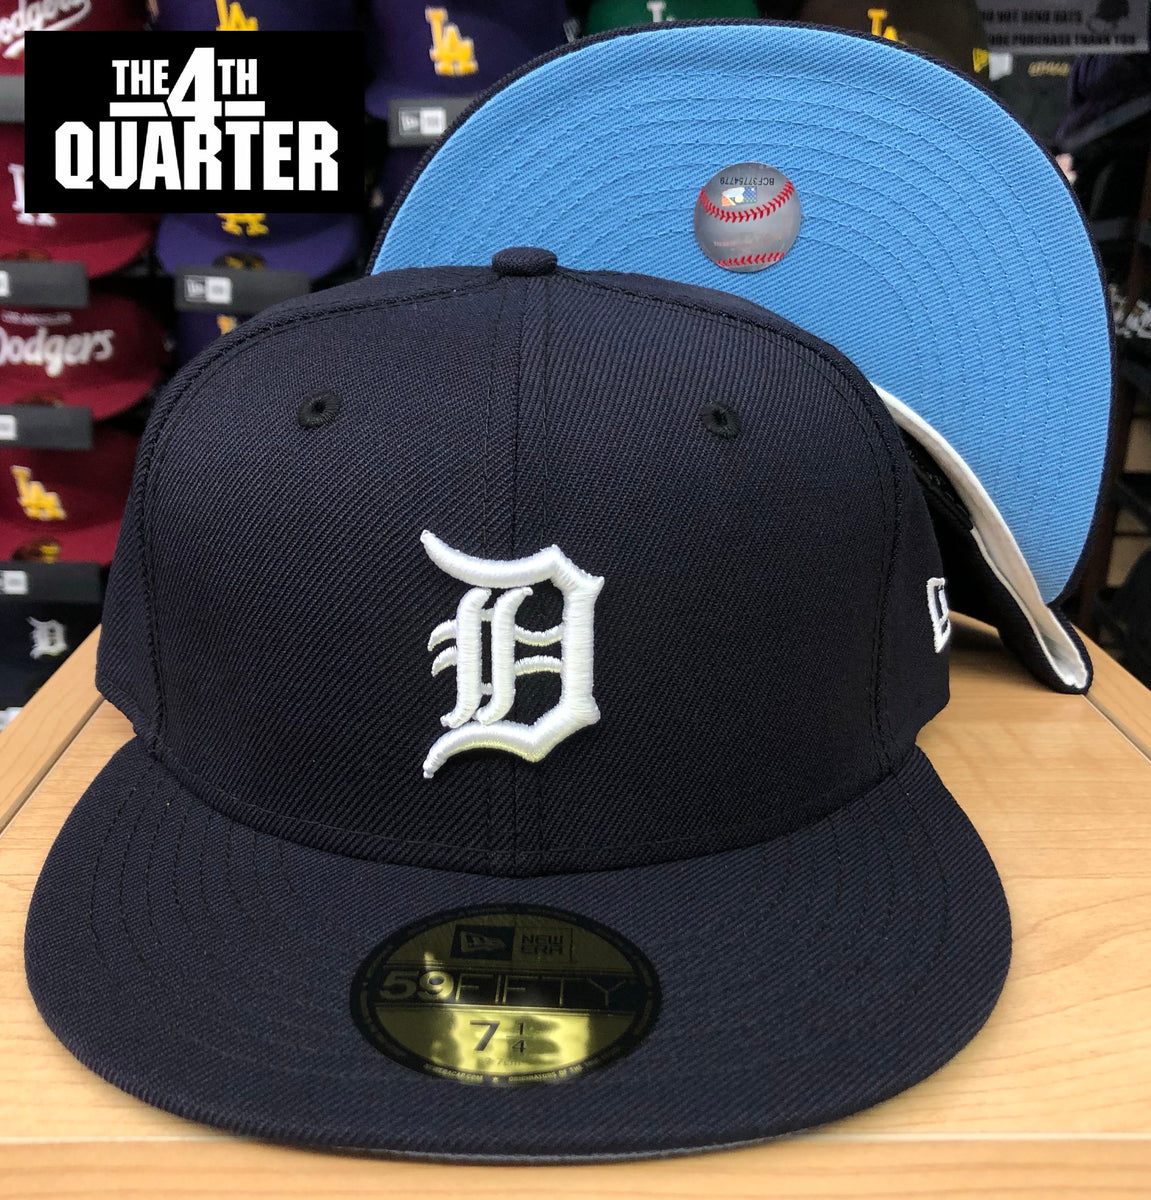 Detroit Tigers New Era 59FIFTY Navy Fitted Cap Hat ICY UV – THE 4TH QUARTER